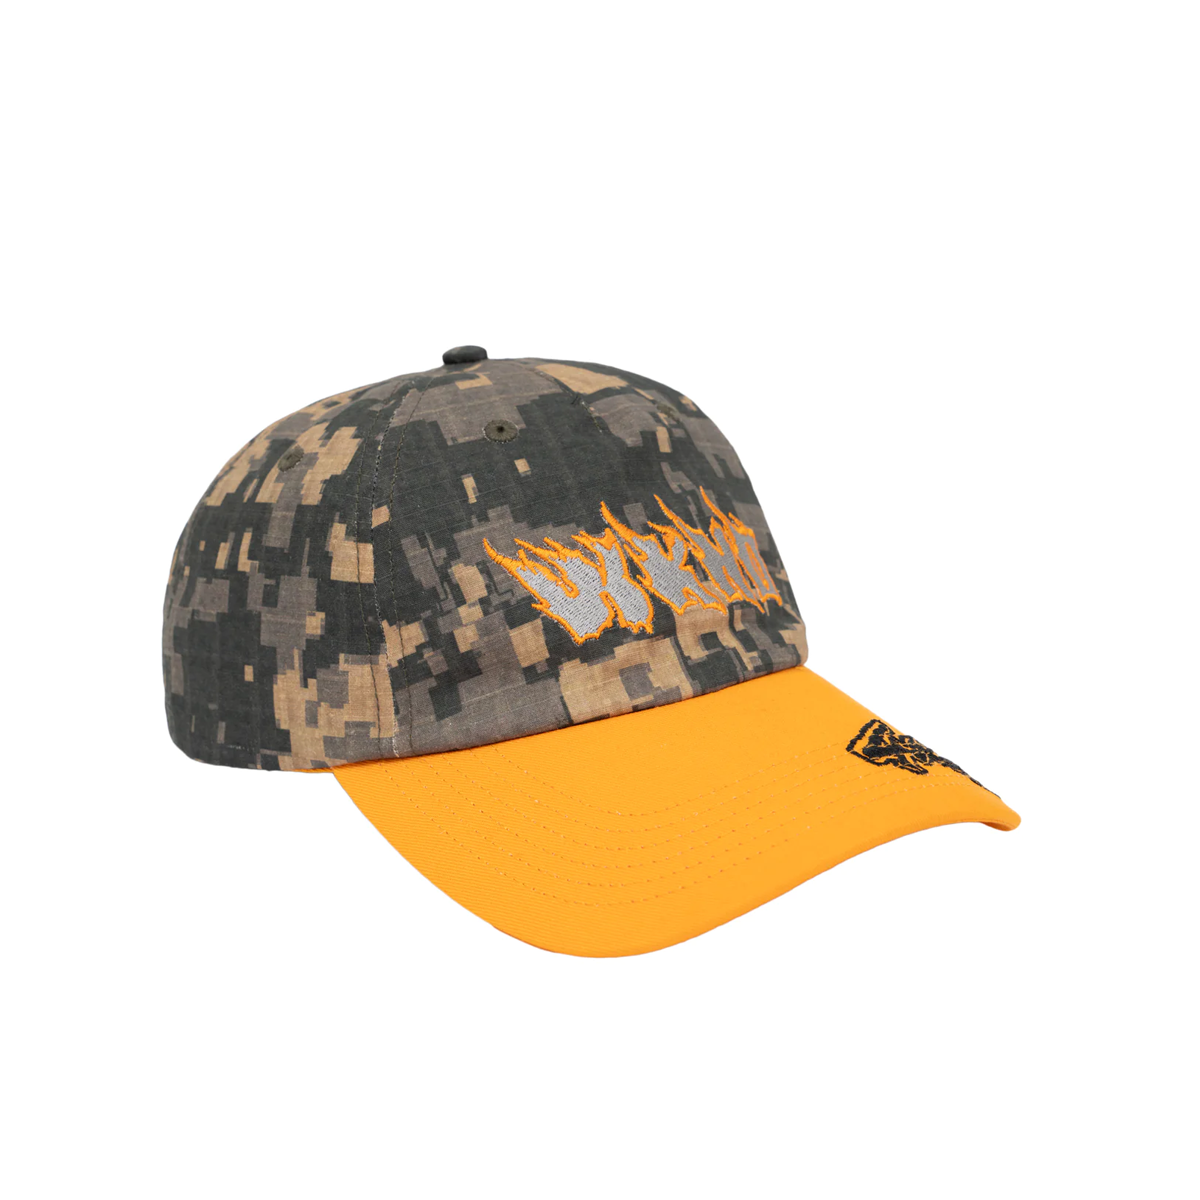 WKND Hot Fire Snapback Hat - Assorted Colors